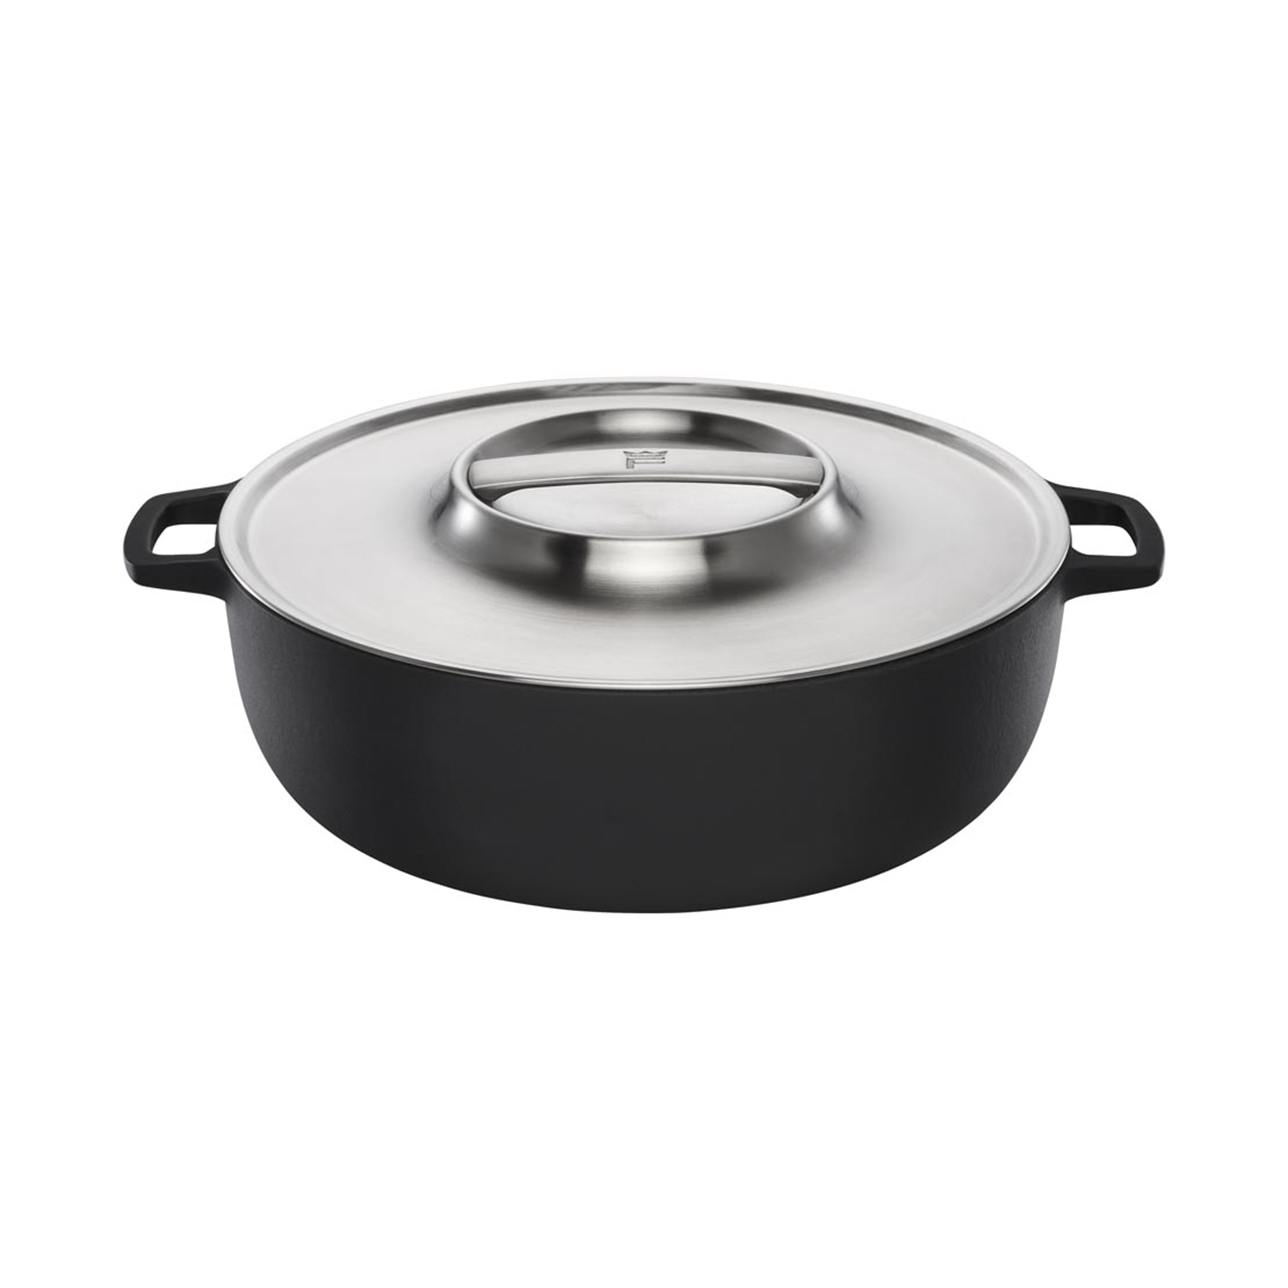 Cast Iron Casserole dish with griddle lid